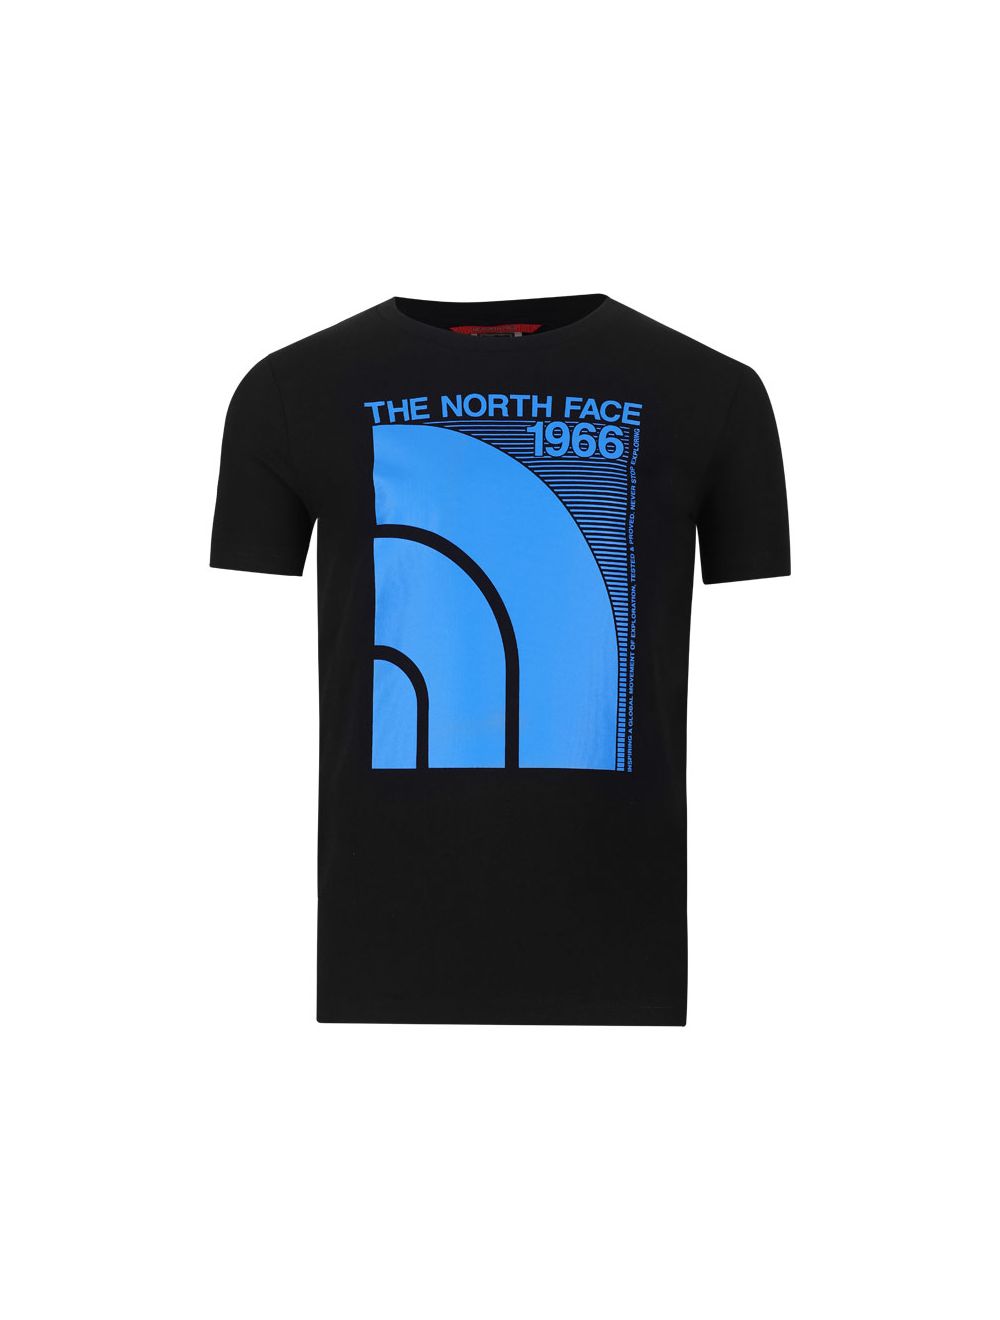 The North Face Graphic Youth T-Shirt Black/Blue